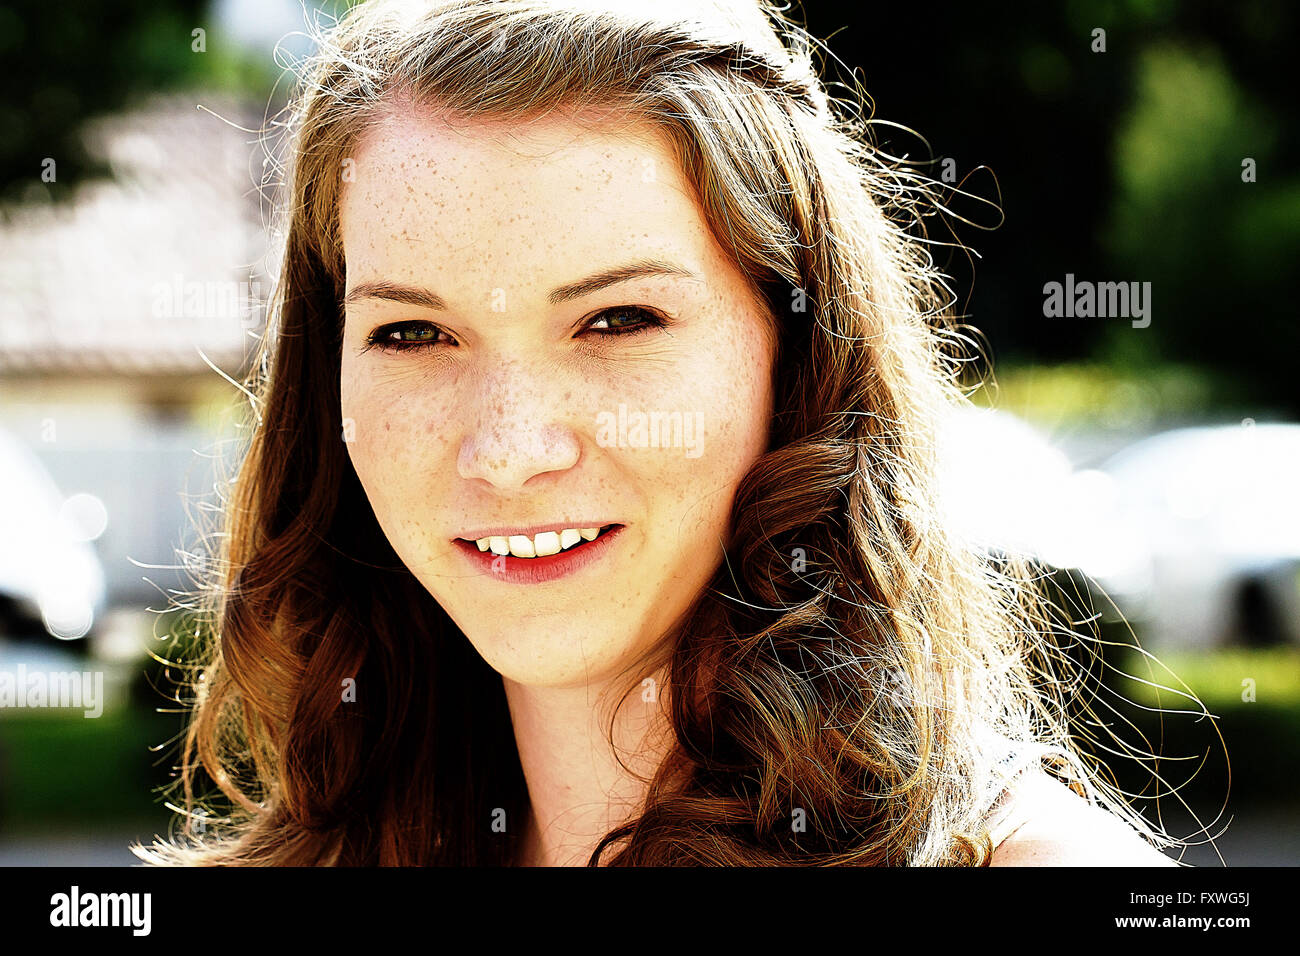 Portrait of a young, smiling woman with freckles Stock Photo